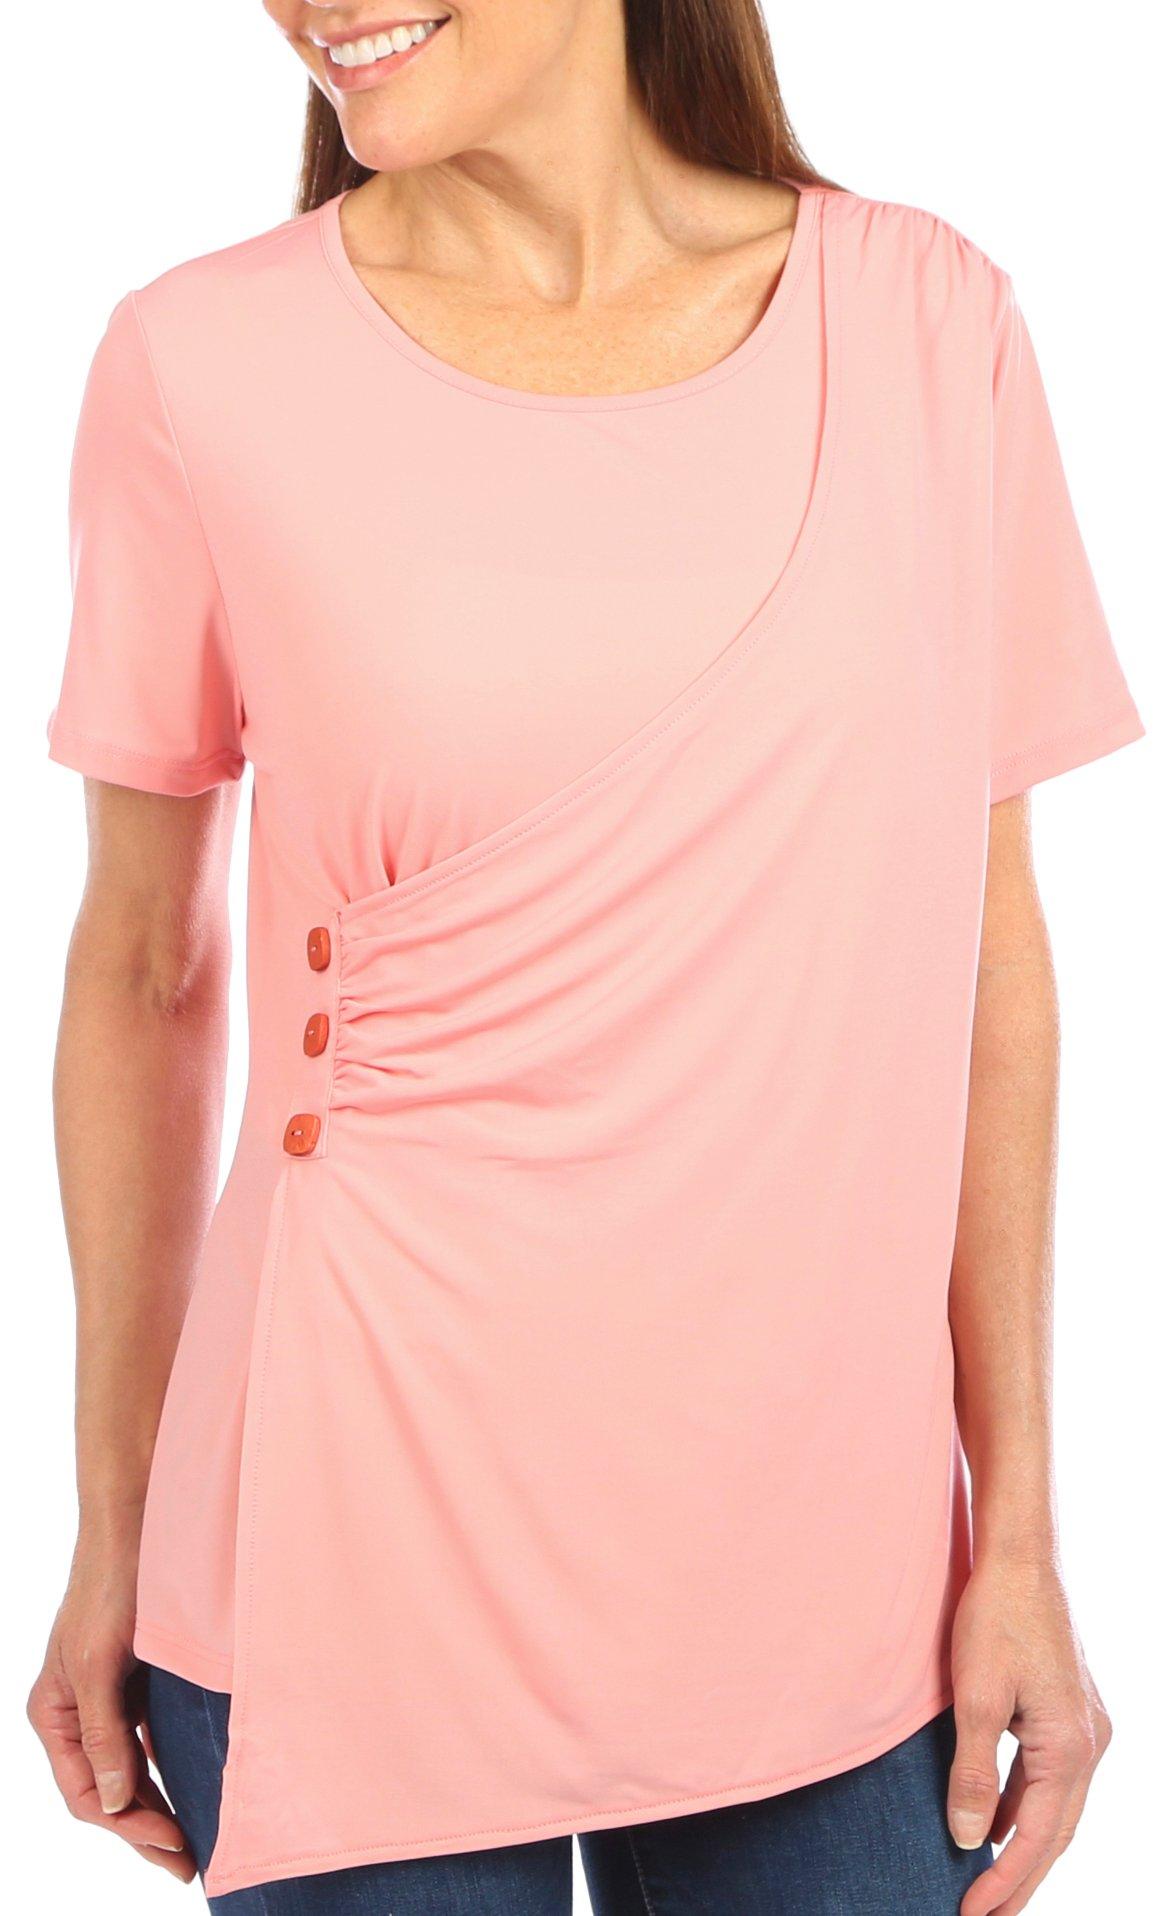 Womens Solid Wrap Short Sleeve Top